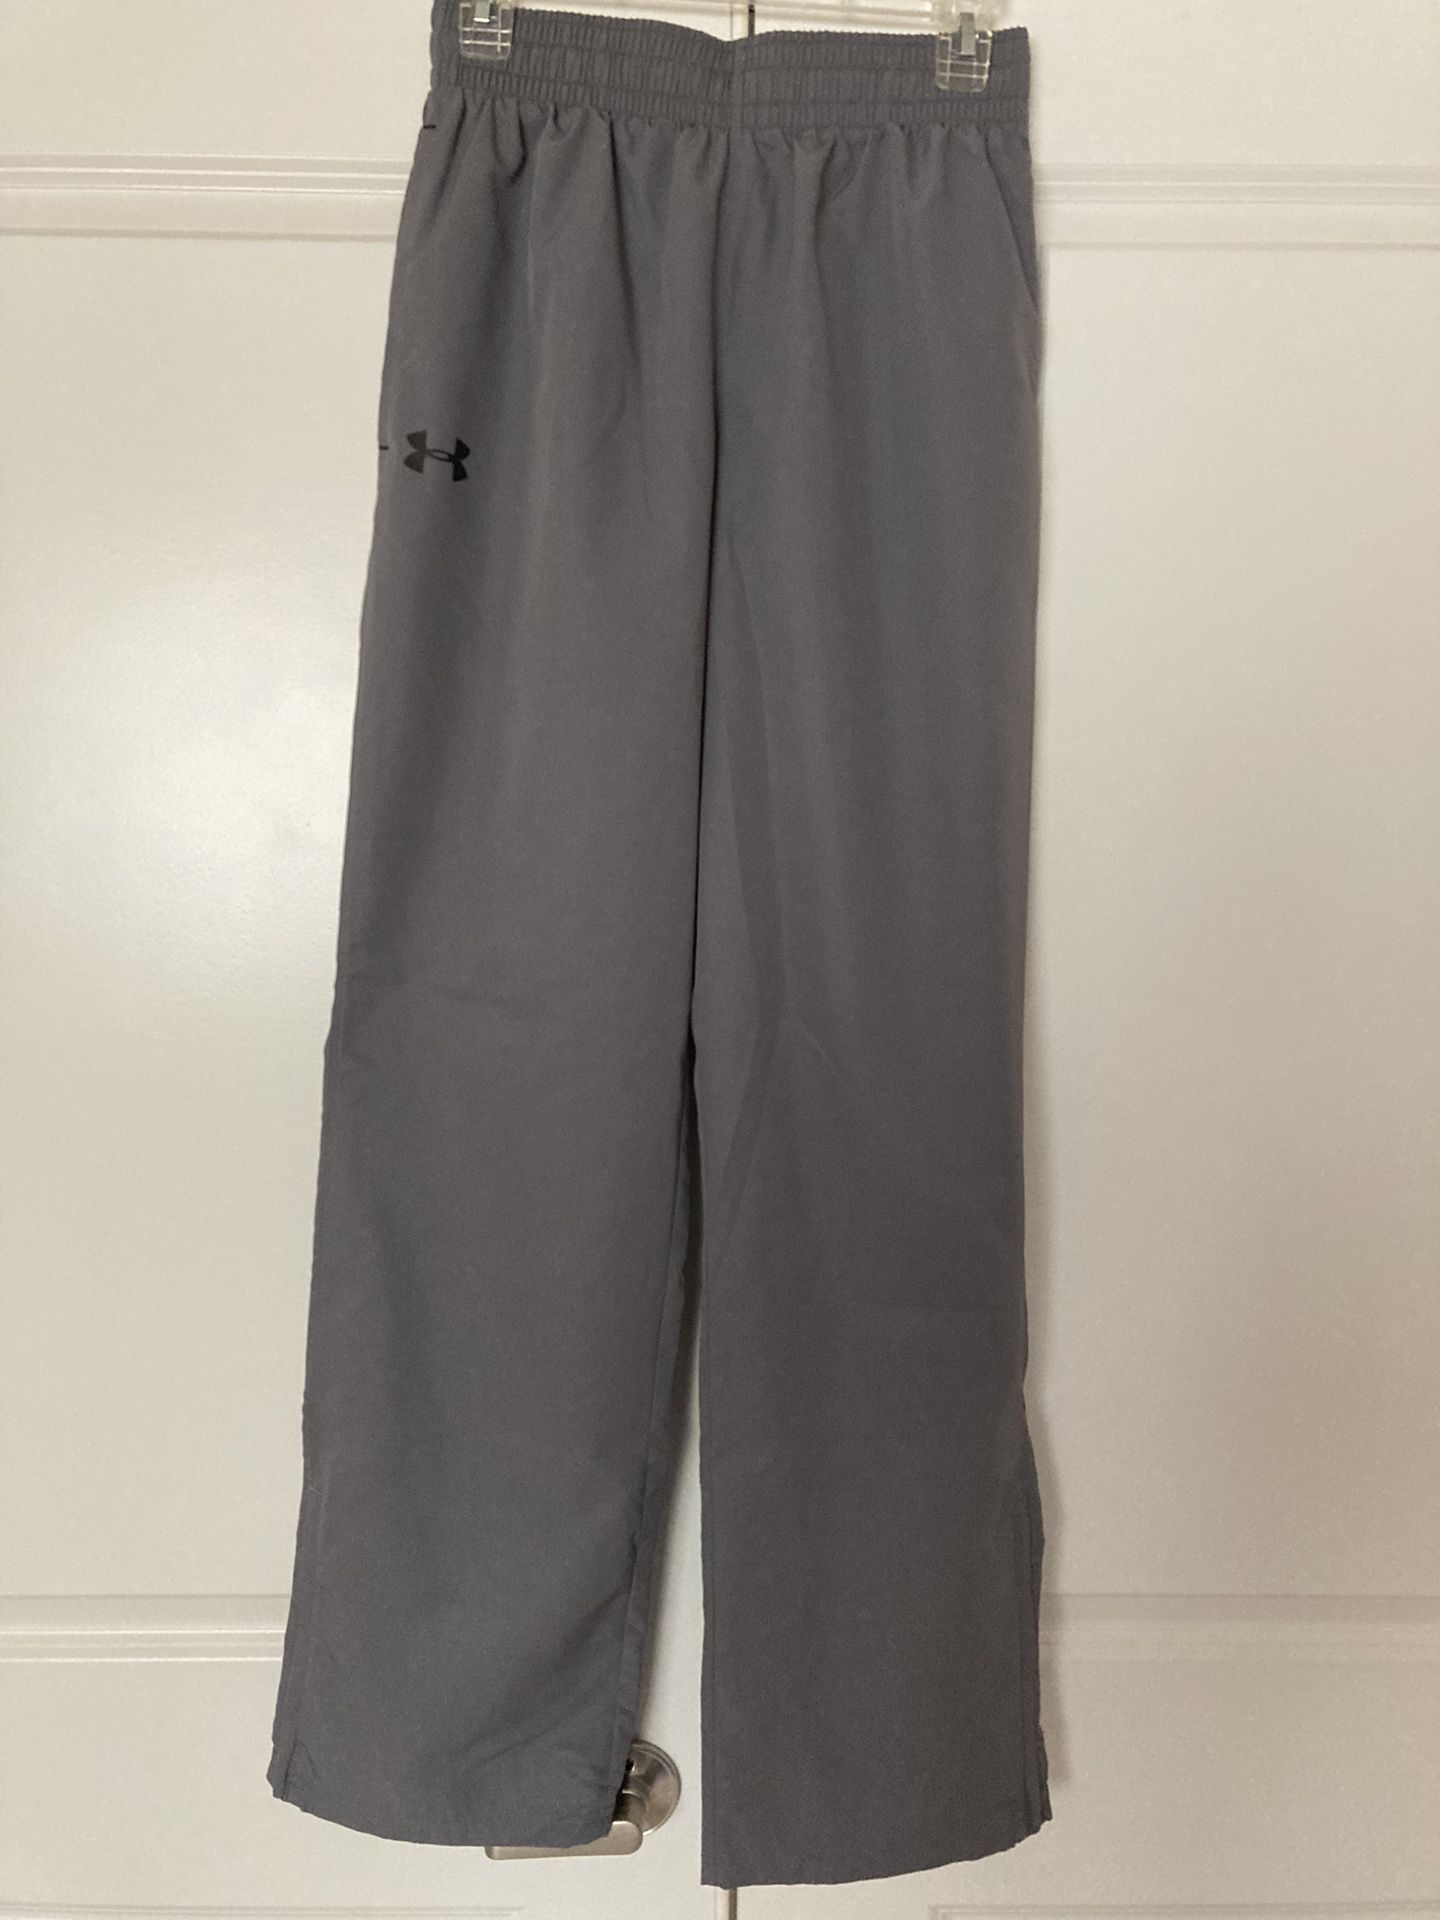 Brand new. Under Armour  Men’s/Youth Joggers Size S. Original price $84.99 tags attached. See my other postings.